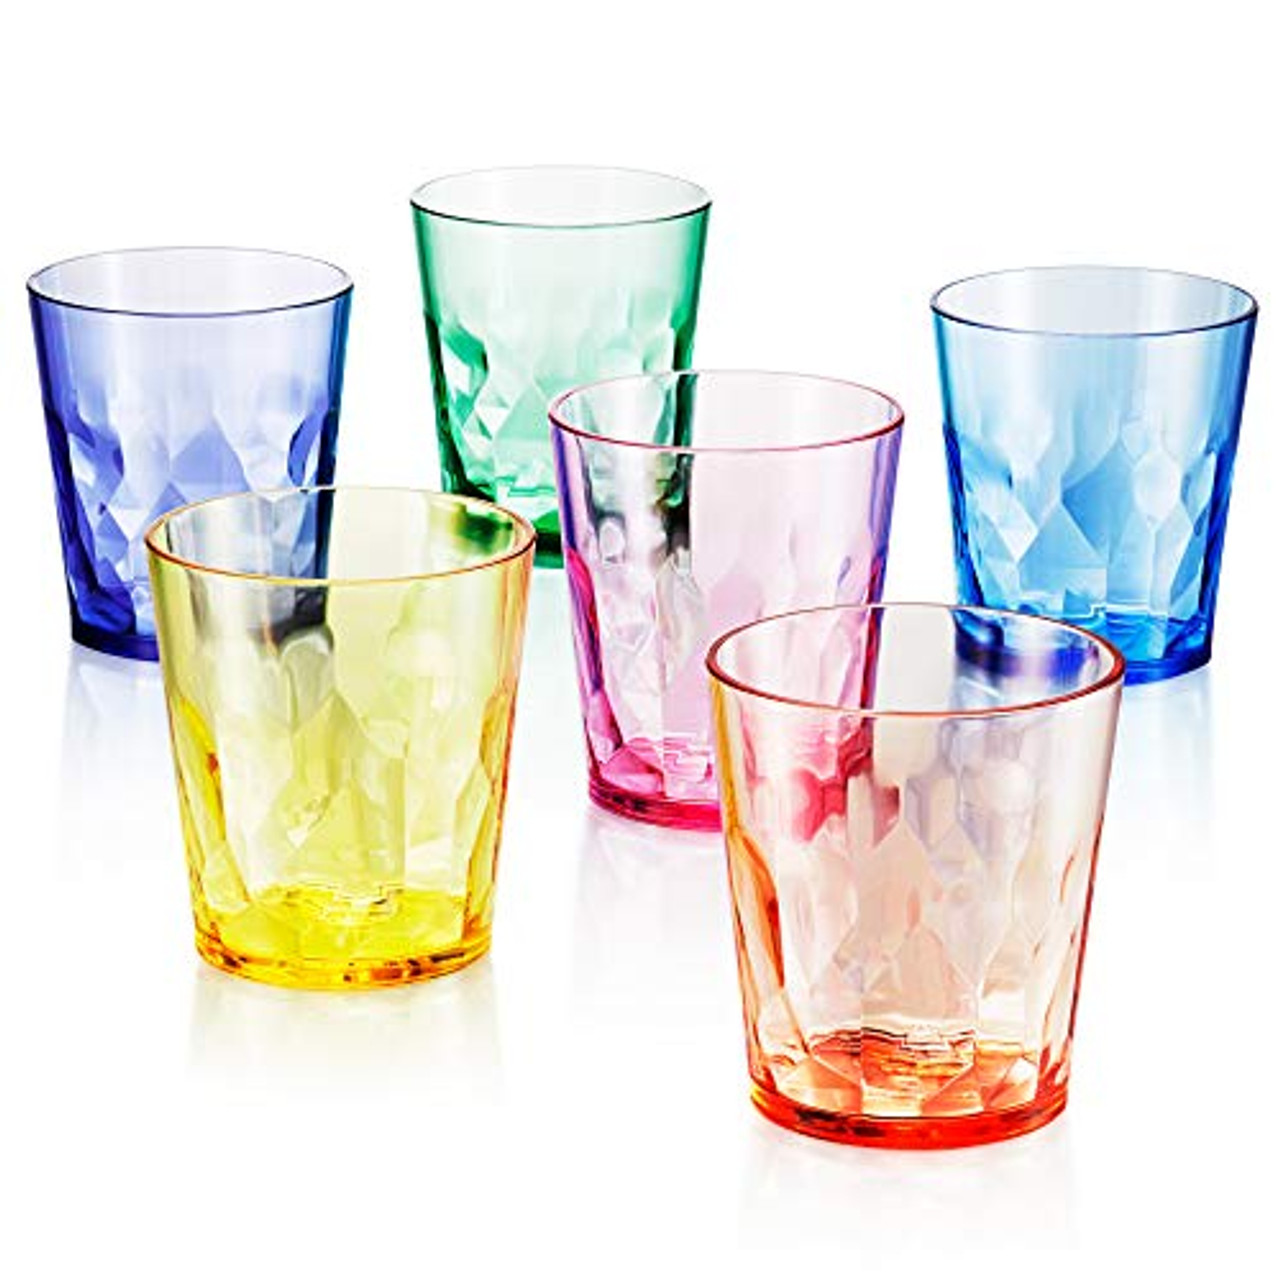 EgieMr Unbreakable Drinking Glasses, 5 Oz Plastic Tumblers Cups Set of 6 in  3 Assorted Colors